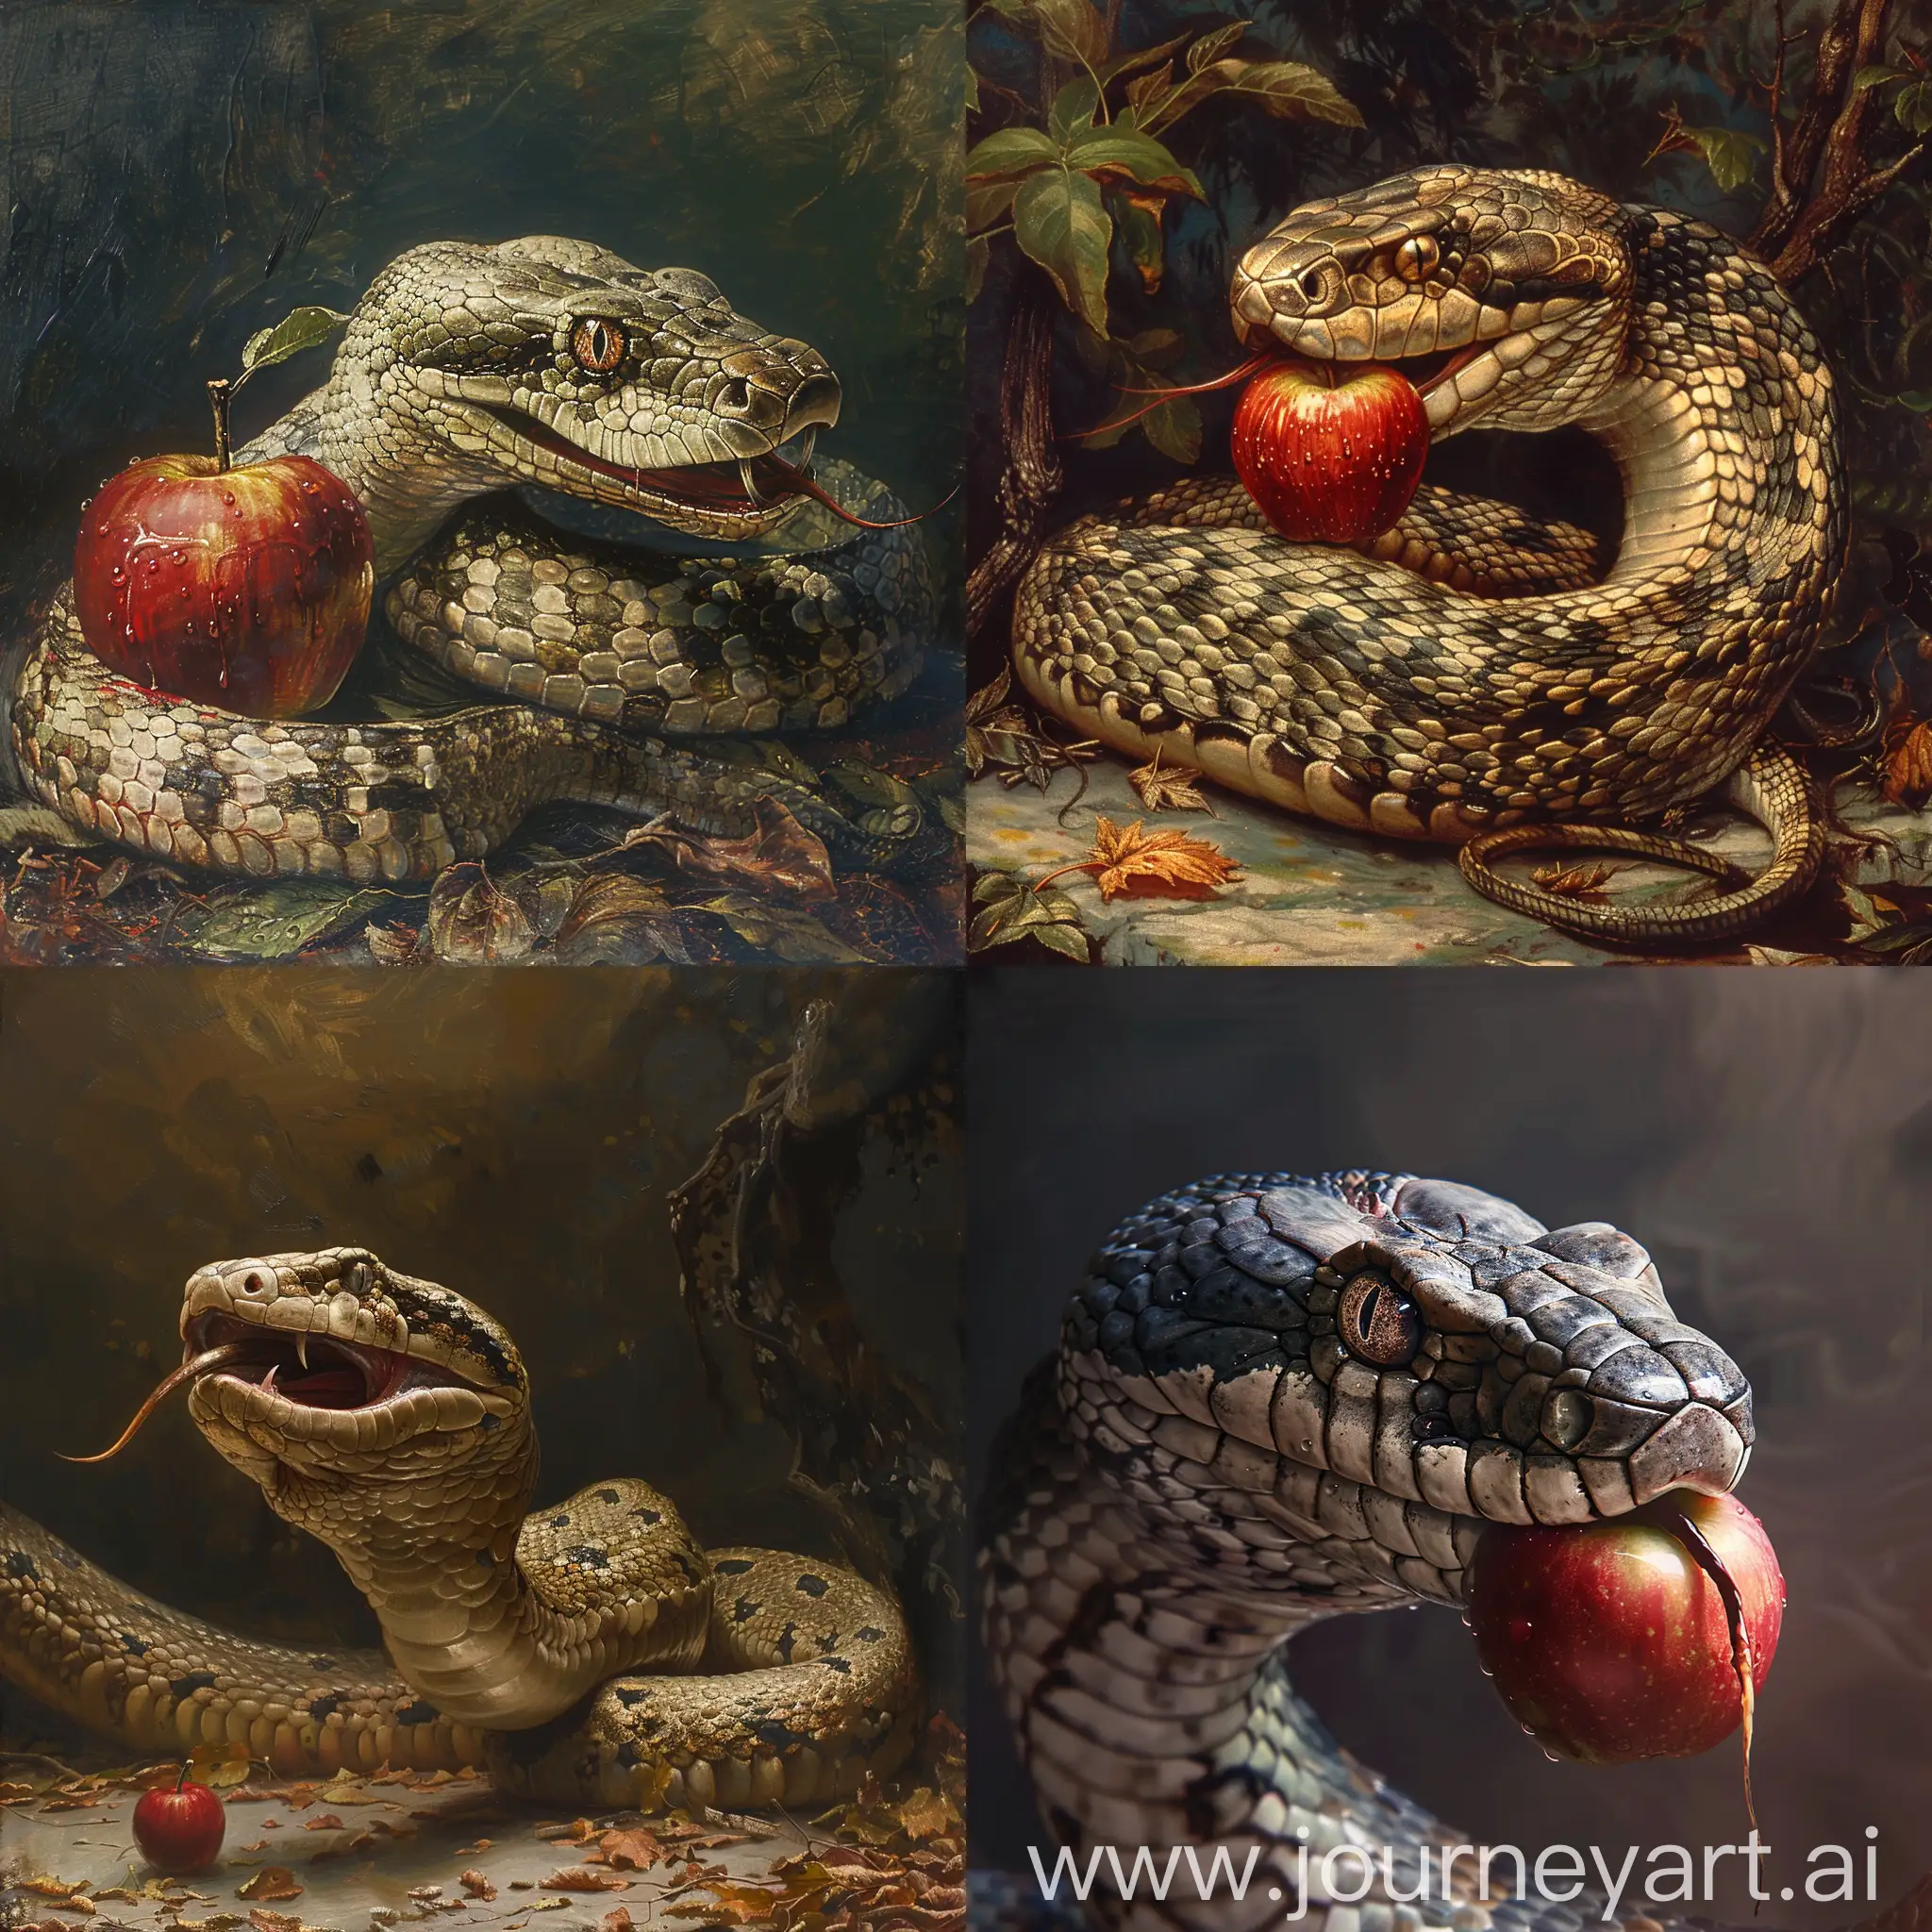 a large serpent eating an apple